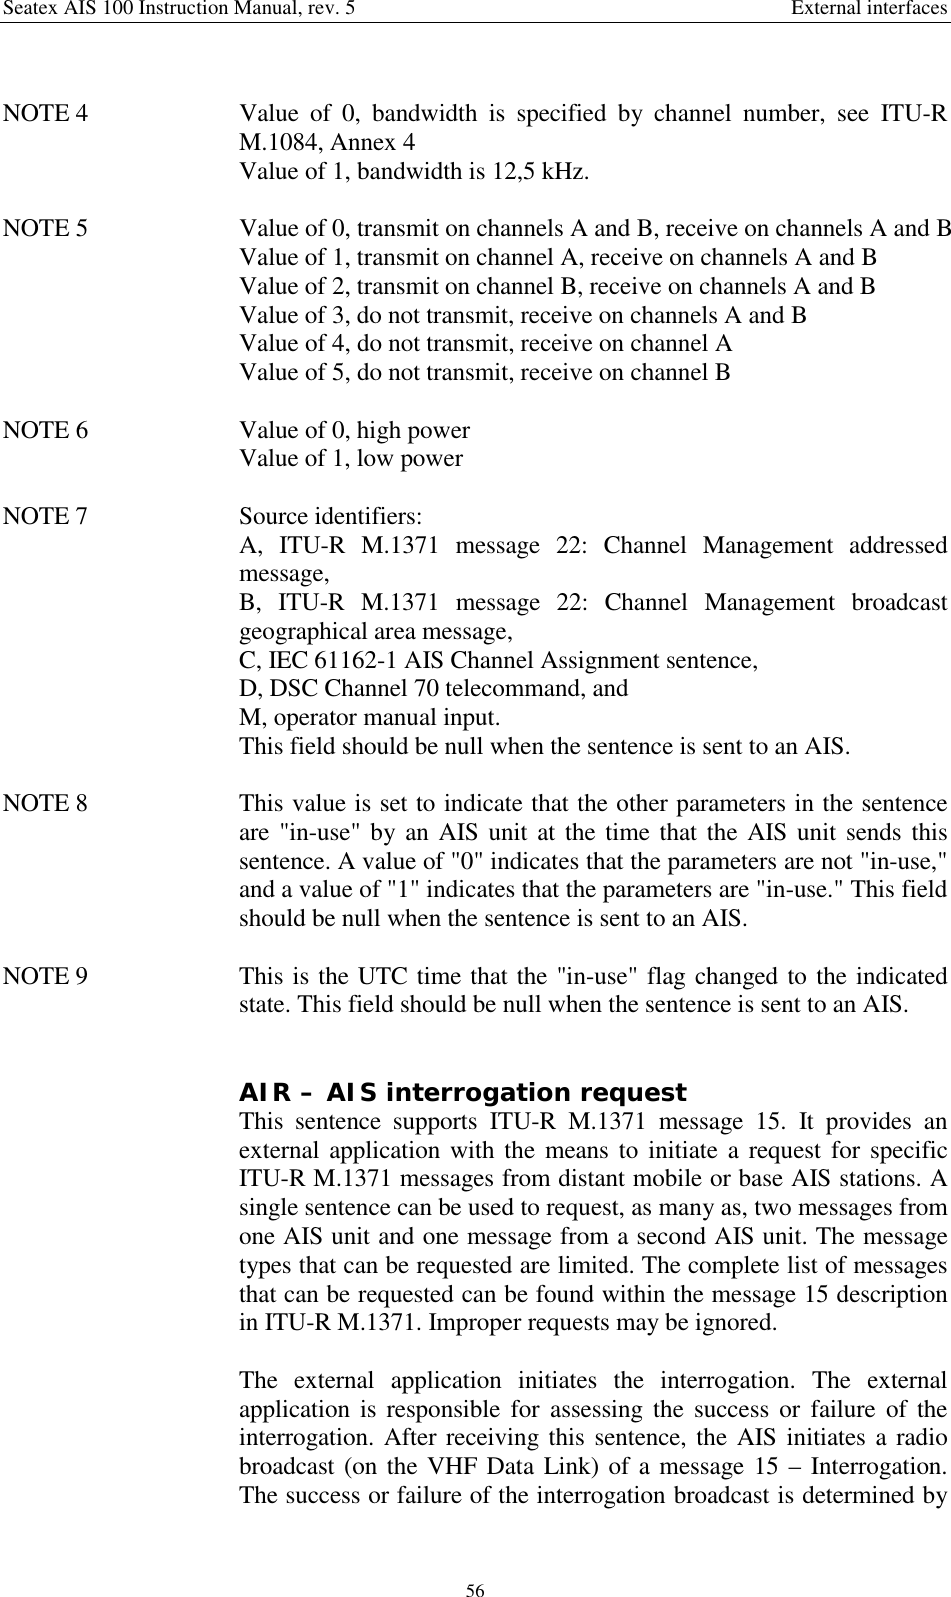 Seatex AIS 100 Instruction Manual, rev. 5 External interfaces56NOTE 4  Value of 0, bandwidth is specified by channel number, see ITU-RM.1084, Annex 4Value of 1, bandwidth is 12,5 kHz.NOTE 5  Value of 0, transmit on channels A and B, receive on channels A and BValue of 1, transmit on channel A, receive on channels A and BValue of 2, transmit on channel B, receive on channels A and BValue of 3, do not transmit, receive on channels A and BValue of 4, do not transmit, receive on channel AValue of 5, do not transmit, receive on channel BNOTE 6  Value of 0, high powerValue of 1, low powerNOTE 7  Source identifiers:A, ITU-R M.1371 message 22: Channel Management addressedmessage,B, ITU-R M.1371 message 22: Channel Management broadcastgeographical area message,C, IEC 61162-1 AIS Channel Assignment sentence,D, DSC Channel 70 telecommand, andM, operator manual input.This field should be null when the sentence is sent to an AIS.NOTE 8  This value is set to indicate that the other parameters in the sentenceare &quot;in-use&quot; by an AIS unit at the time that the AIS unit sends thissentence. A value of &quot;0&quot; indicates that the parameters are not &quot;in-use,&quot;and a value of &quot;1&quot; indicates that the parameters are &quot;in-use.&quot; This fieldshould be null when the sentence is sent to an AIS.NOTE 9  This is the UTC time that the &quot;in-use&quot; flag changed to the indicatedstate. This field should be null when the sentence is sent to an AIS.AIR – AIS interrogation requestThis sentence supports ITU-R M.1371 message 15. It provides anexternal application with the means to initiate a request for specificITU-R M.1371 messages from distant mobile or base AIS stations. Asingle sentence can be used to request, as many as, two messages fromone AIS unit and one message from a second AIS unit. The messagetypes that can be requested are limited. The complete list of messagesthat can be requested can be found within the message 15 descriptionin ITU-R M.1371. Improper requests may be ignored.The external application initiates the interrogation. The externalapplication is responsible for assessing the success or failure of theinterrogation. After receiving this sentence, the AIS initiates a radiobroadcast (on the VHF Data Link) of a message 15 – Interrogation.The success or failure of the interrogation broadcast is determined by